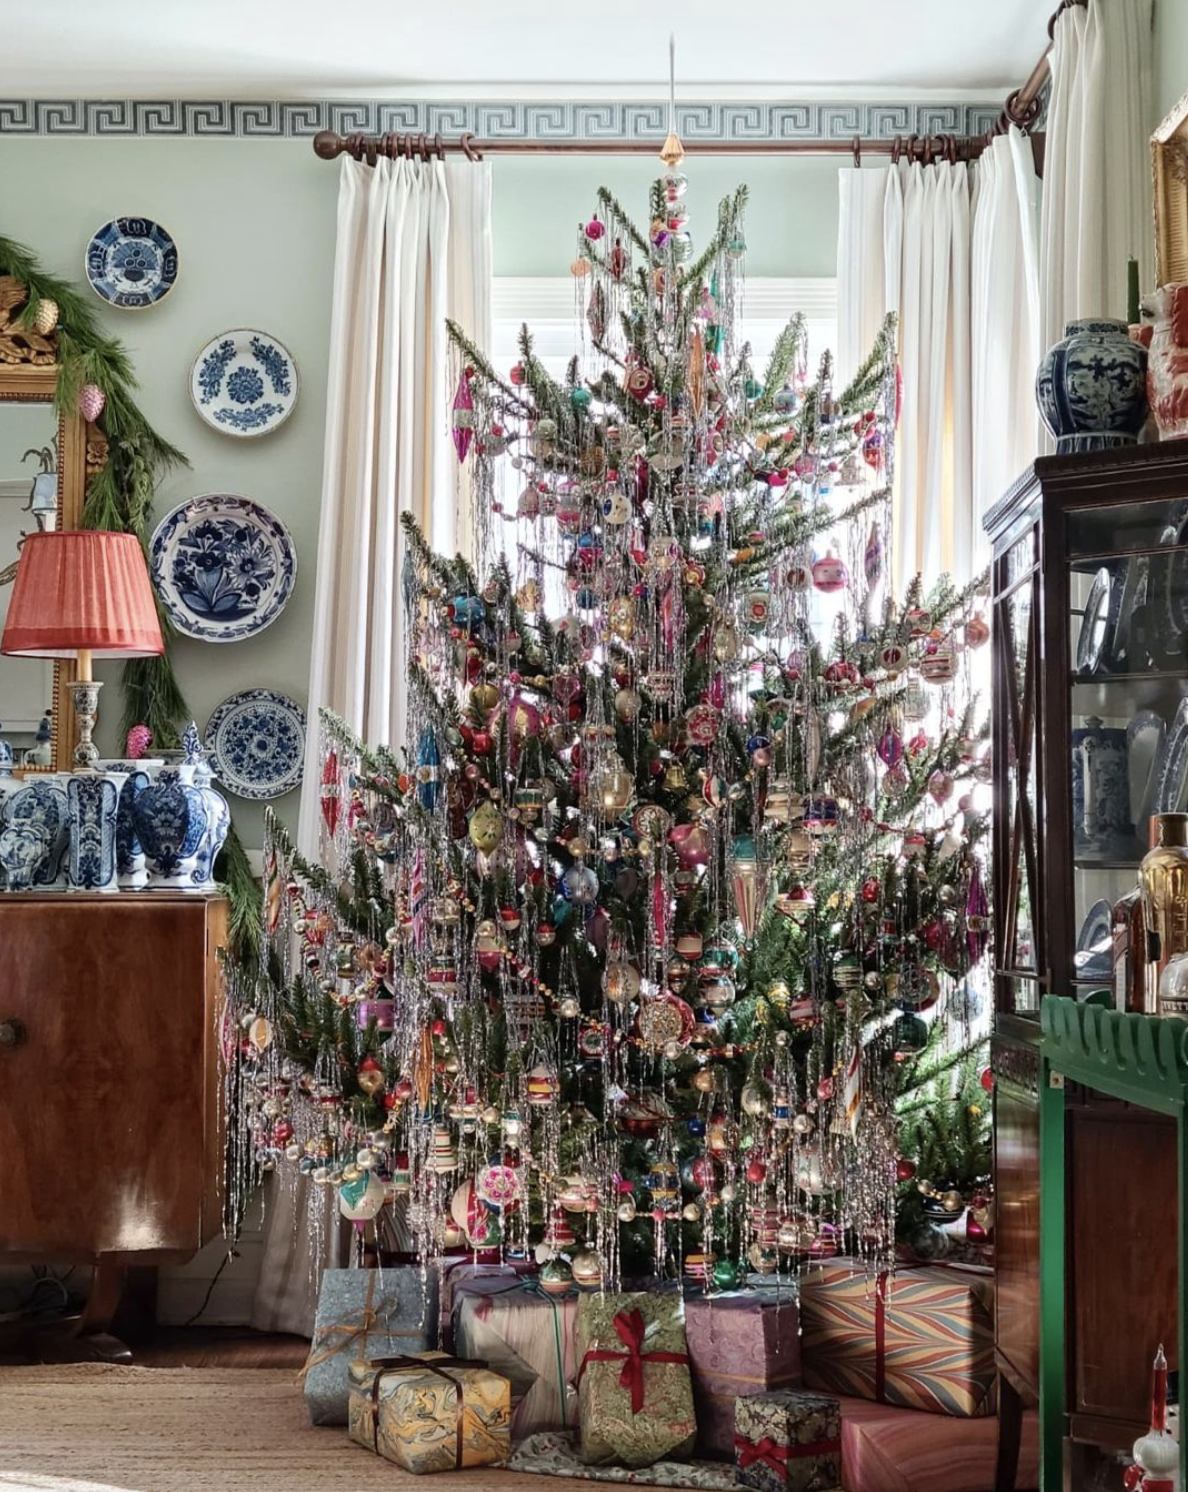 13 Vintage Christmas Decorations We Love for the Holidays